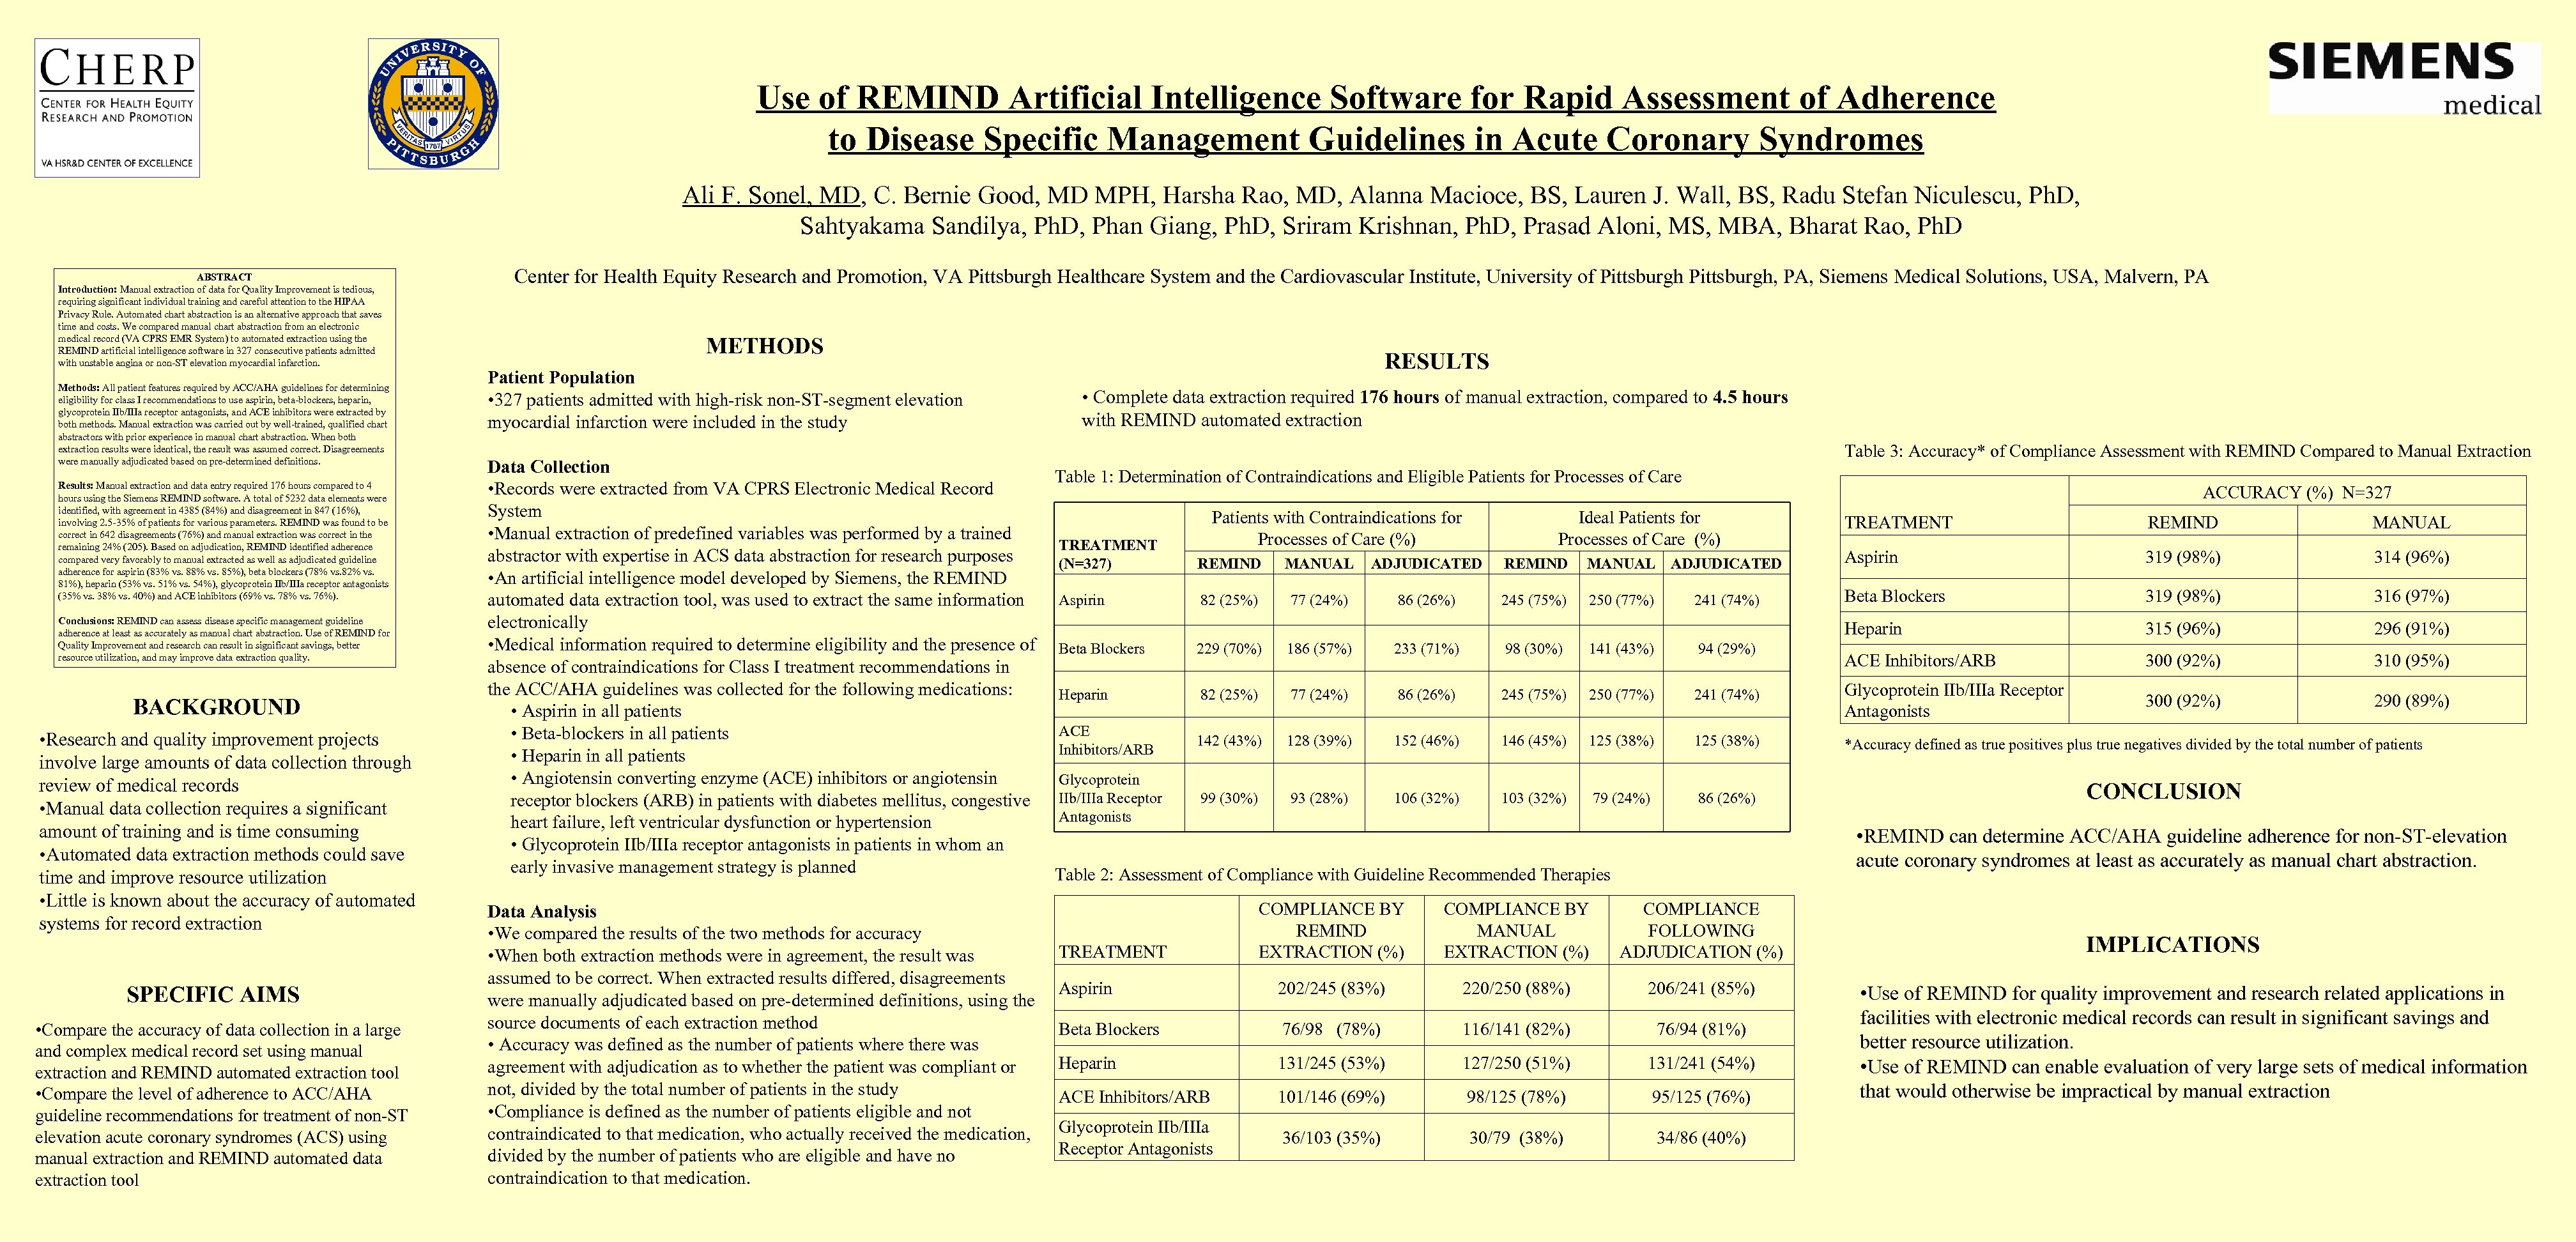 Use of REMIND Artificial Intelligence Software for Rapid Assessment of Adherence to Disease Specific